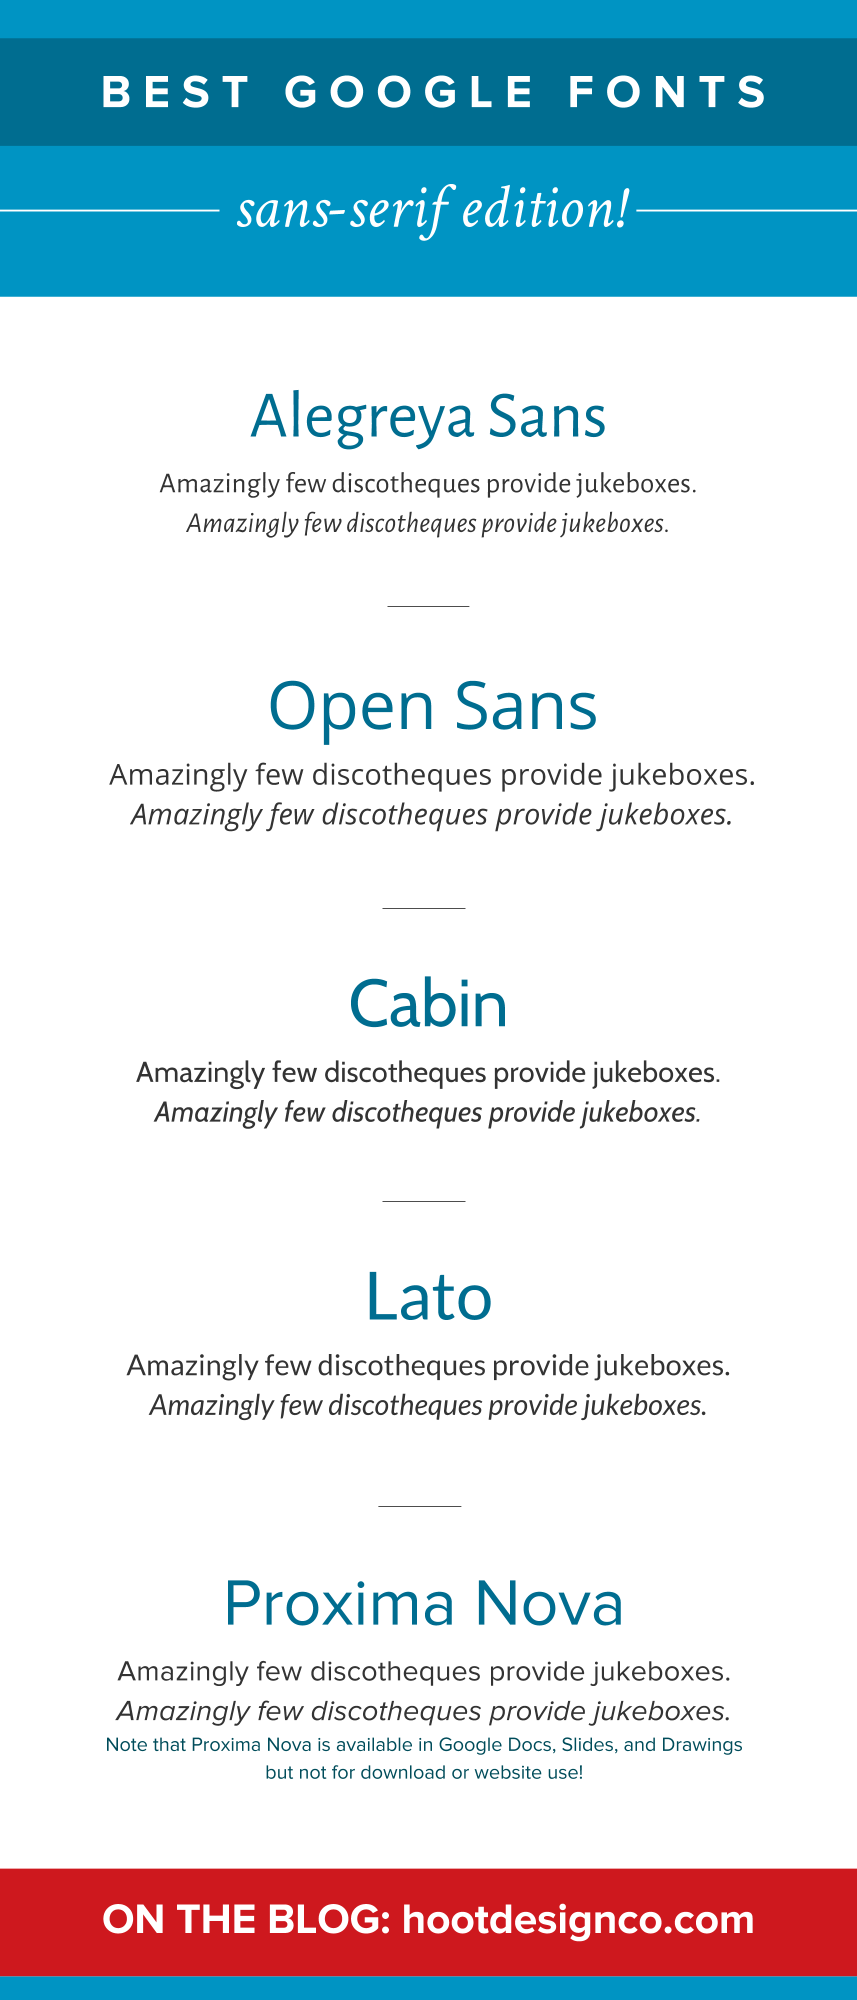 What+are+the+best+sans-serif+fonts+on+Google+fonts_+There+are+lots+of+options,+but+these+are+great+for+both+paragraphs+AND+headings.png